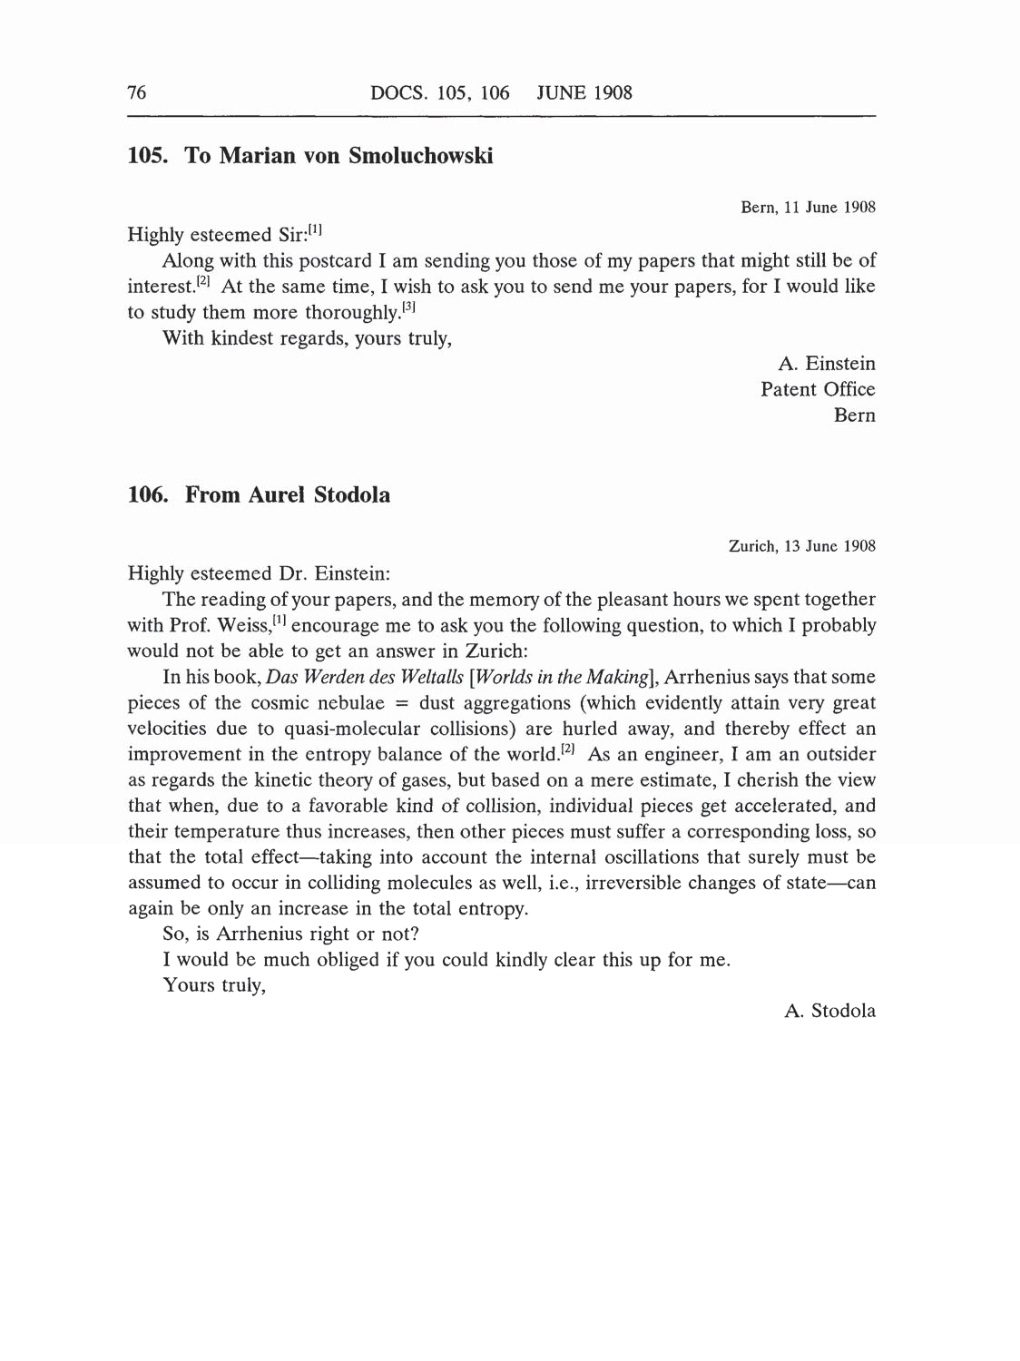 Volume 5: The Swiss Years: Correspondence, 1902-1914 (English translation supplement) page 76